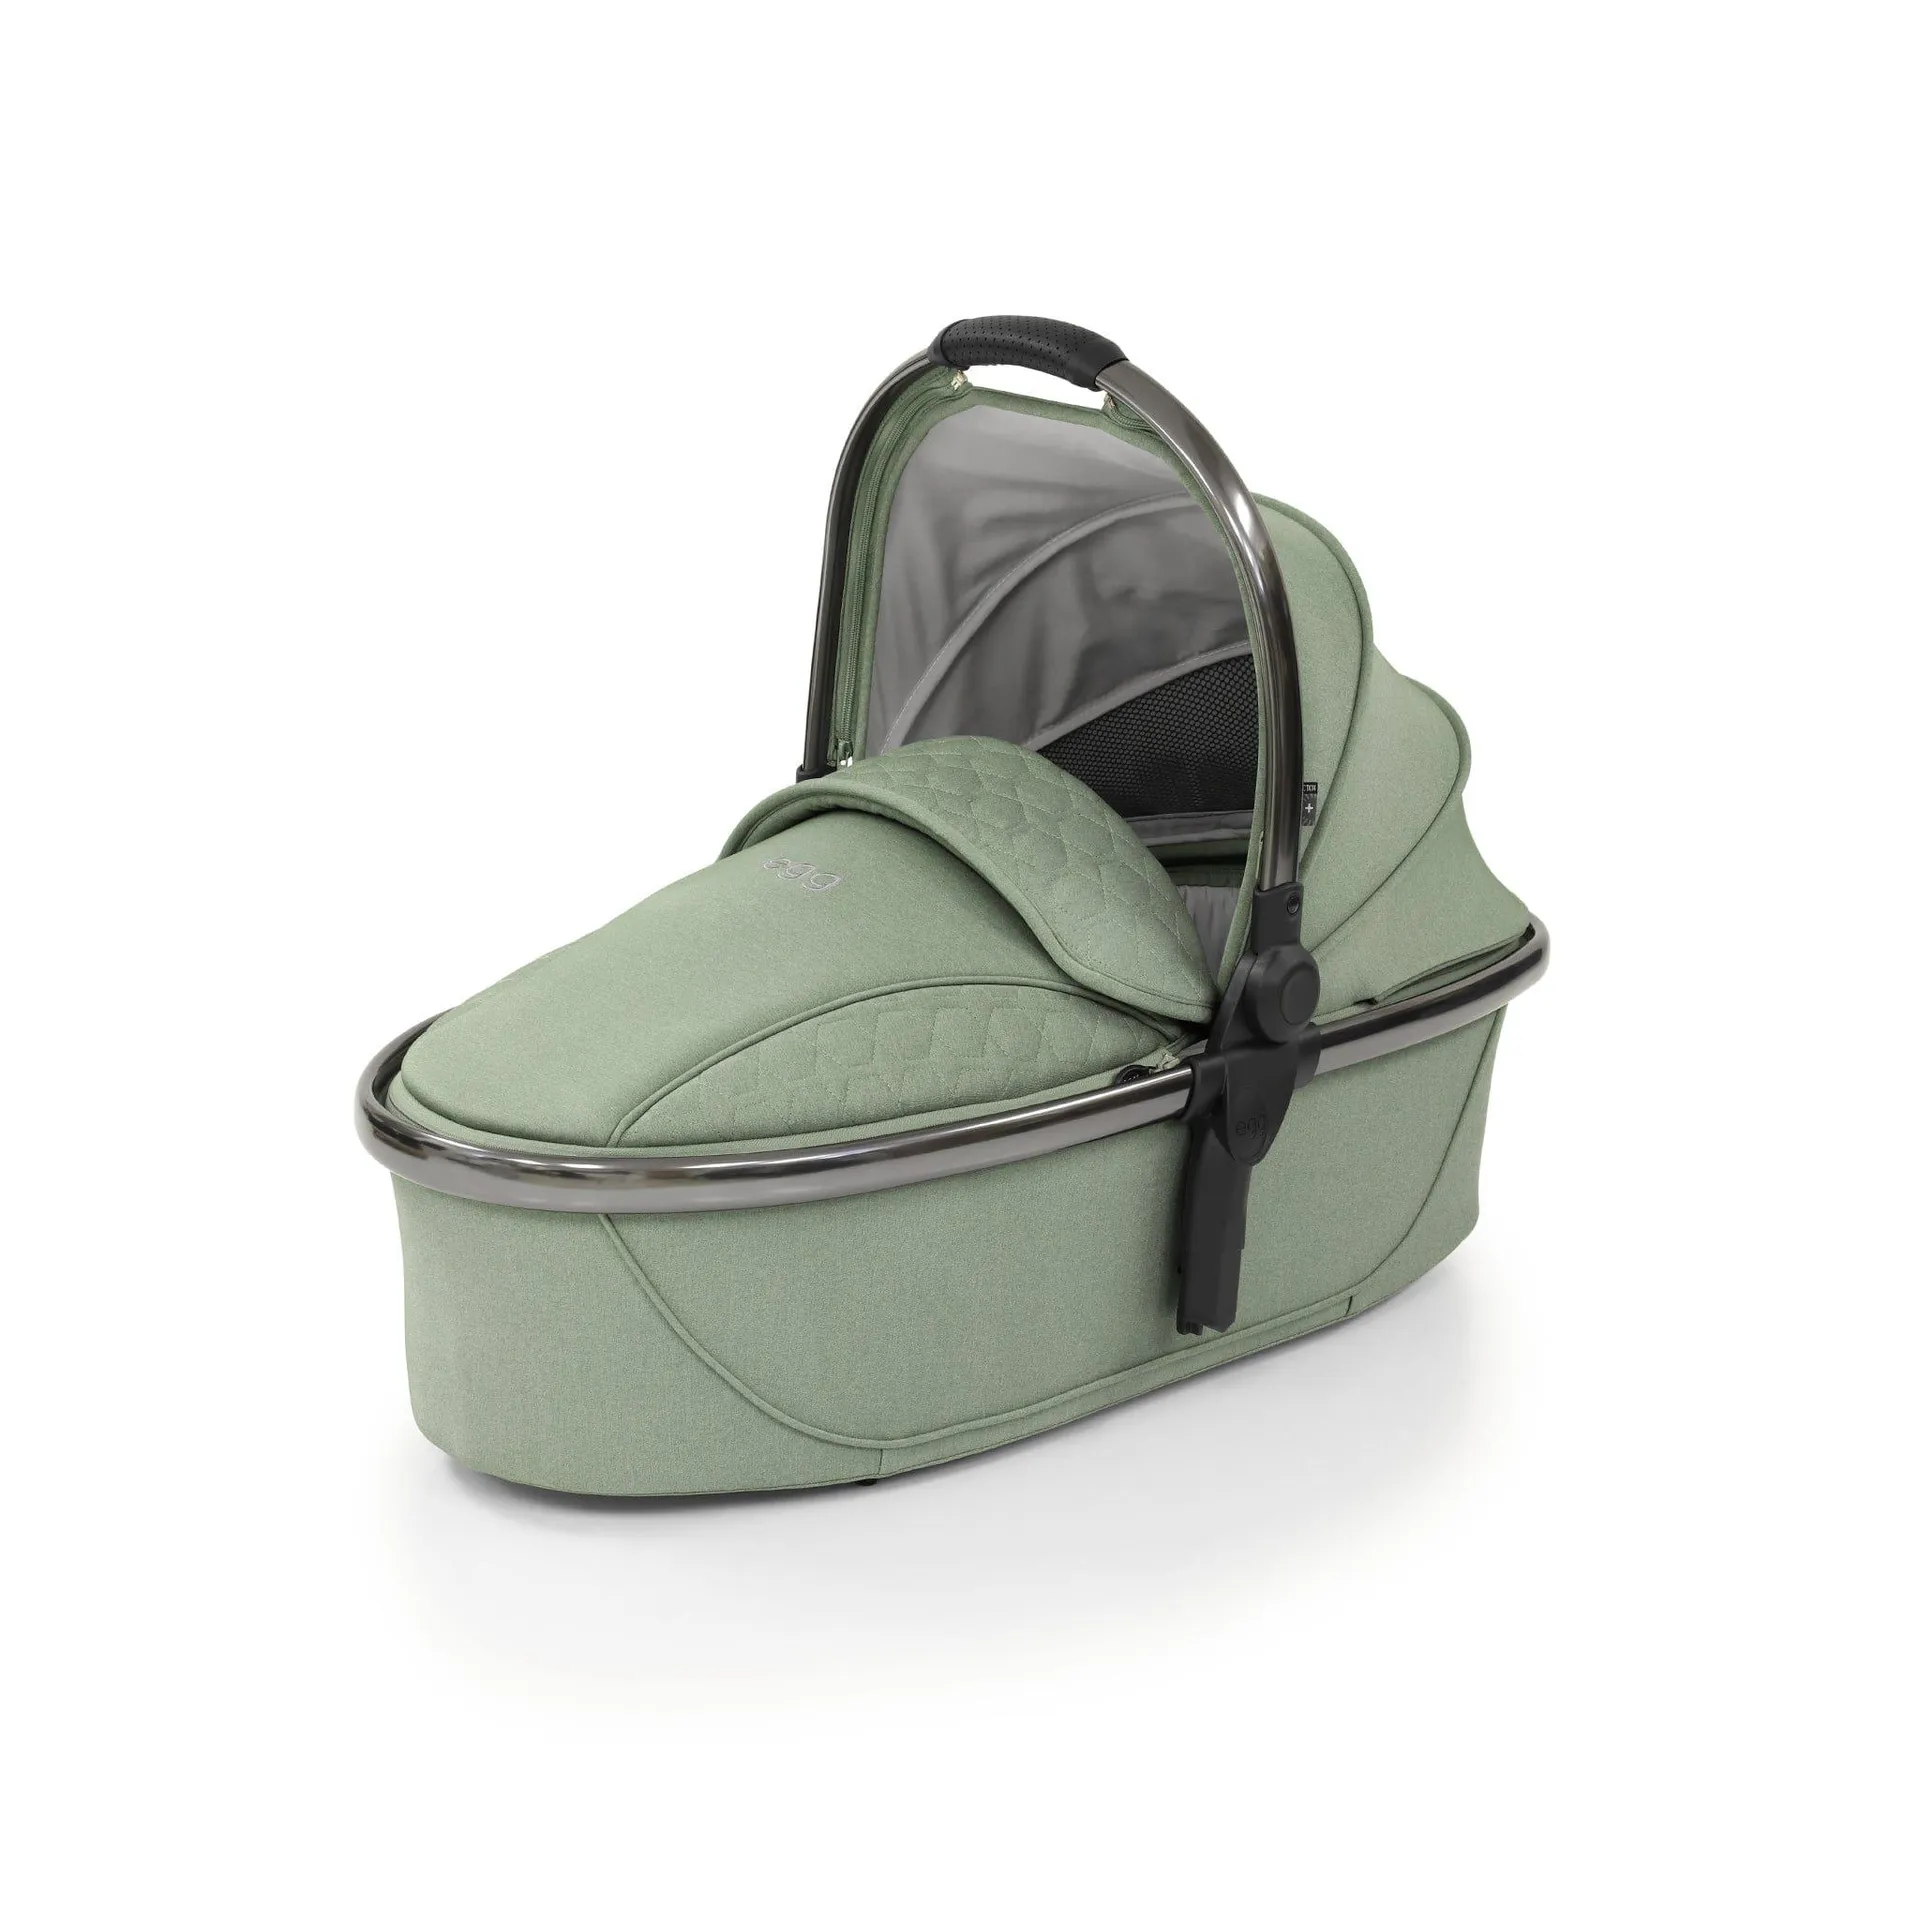 egg2 Carrycot Seagrass